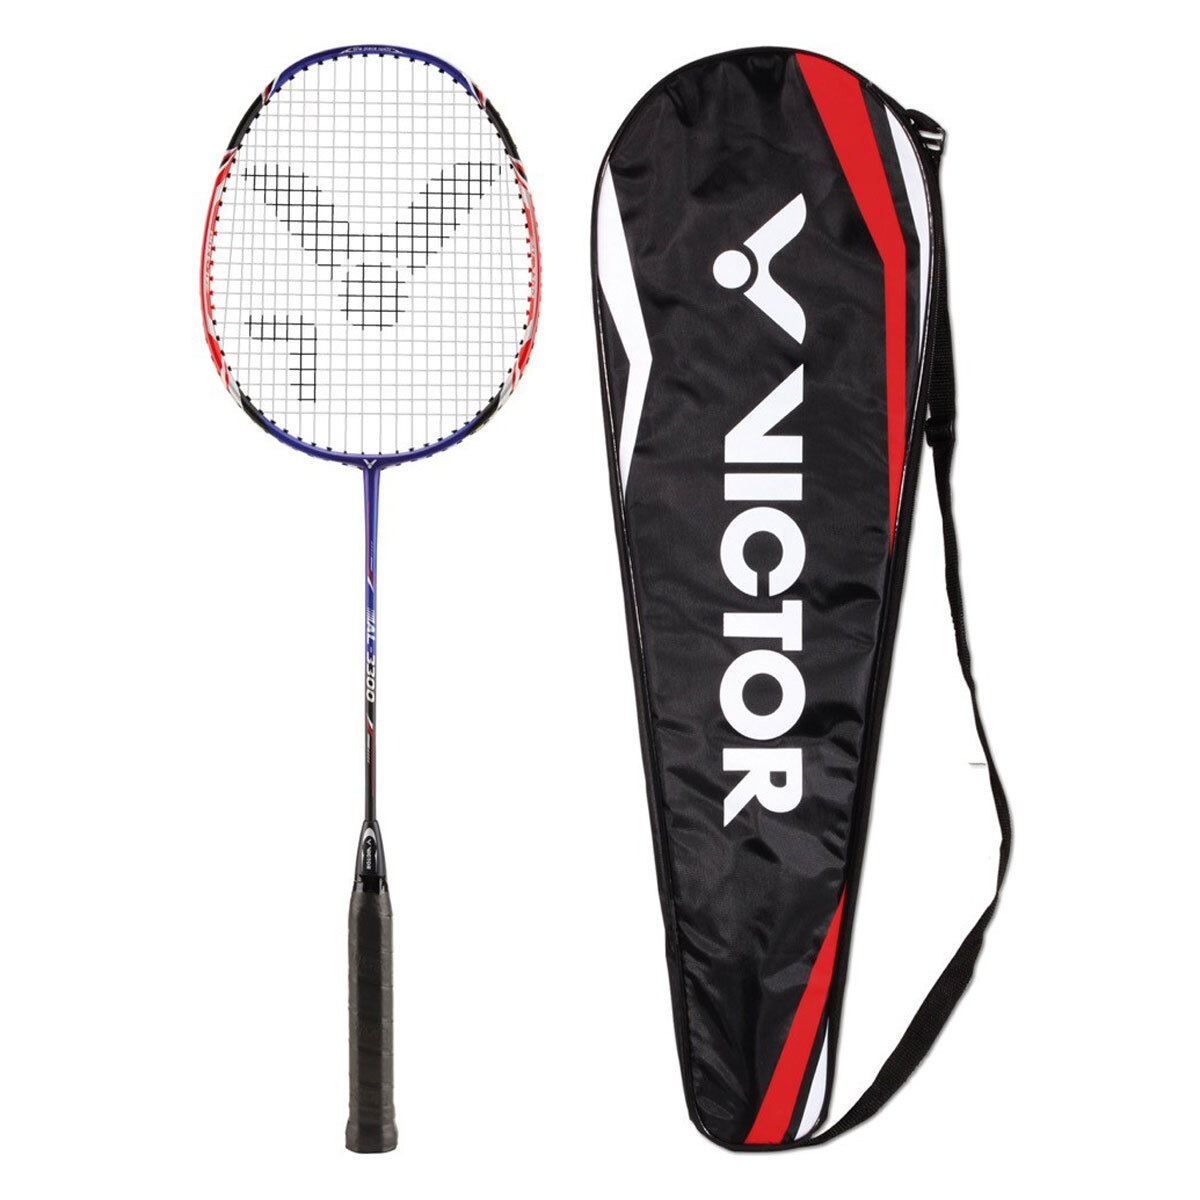 Racket and Cover